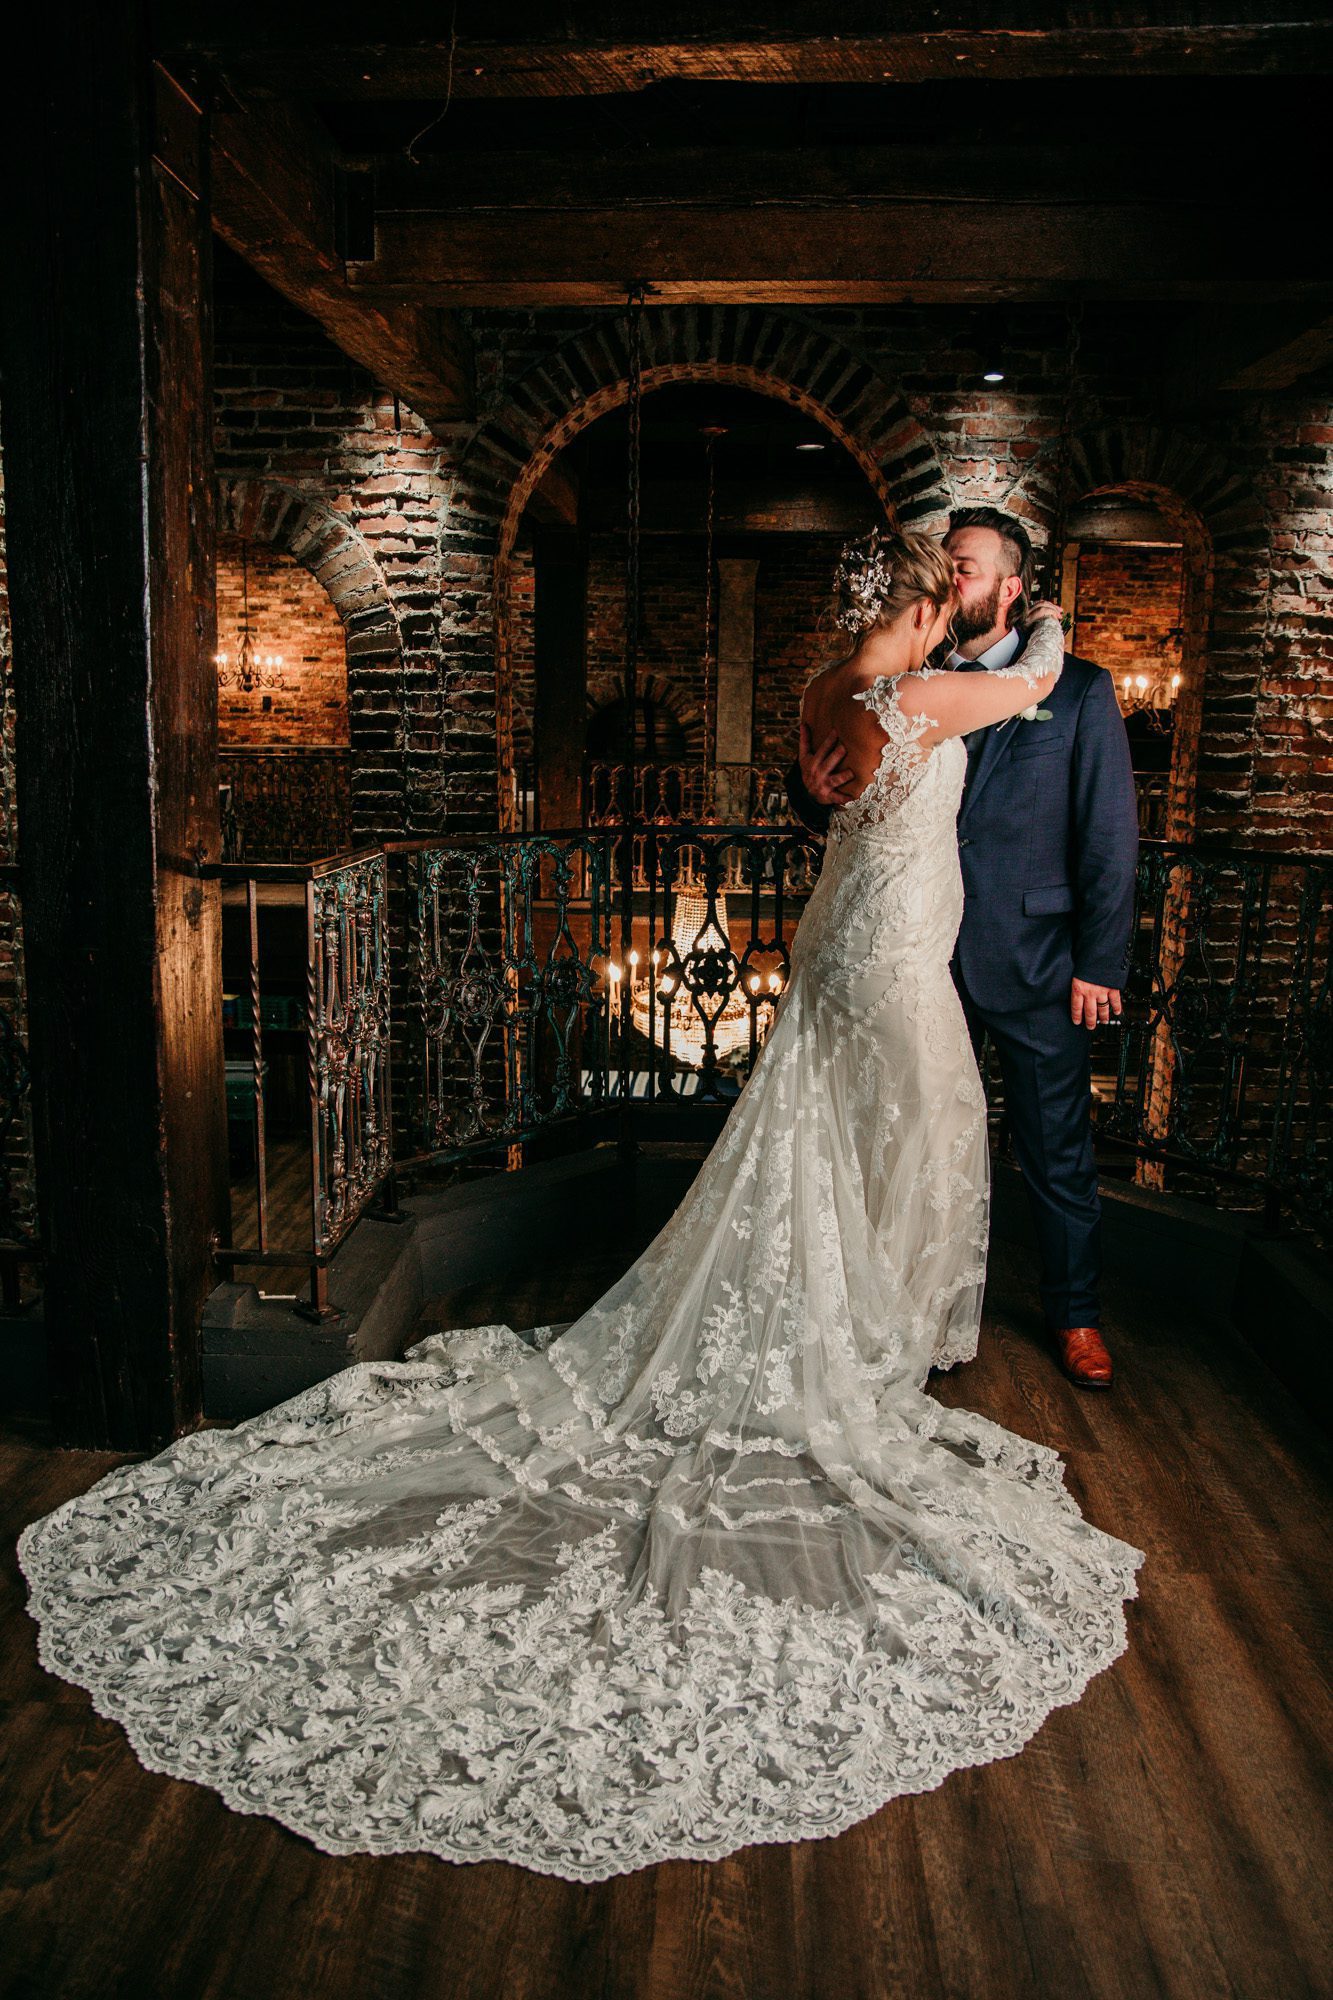 Bride and groom inside a vintage brick building old world charm at the Bedford event and wedding venue in Nashville TN. Photo by Krista Lee Photography